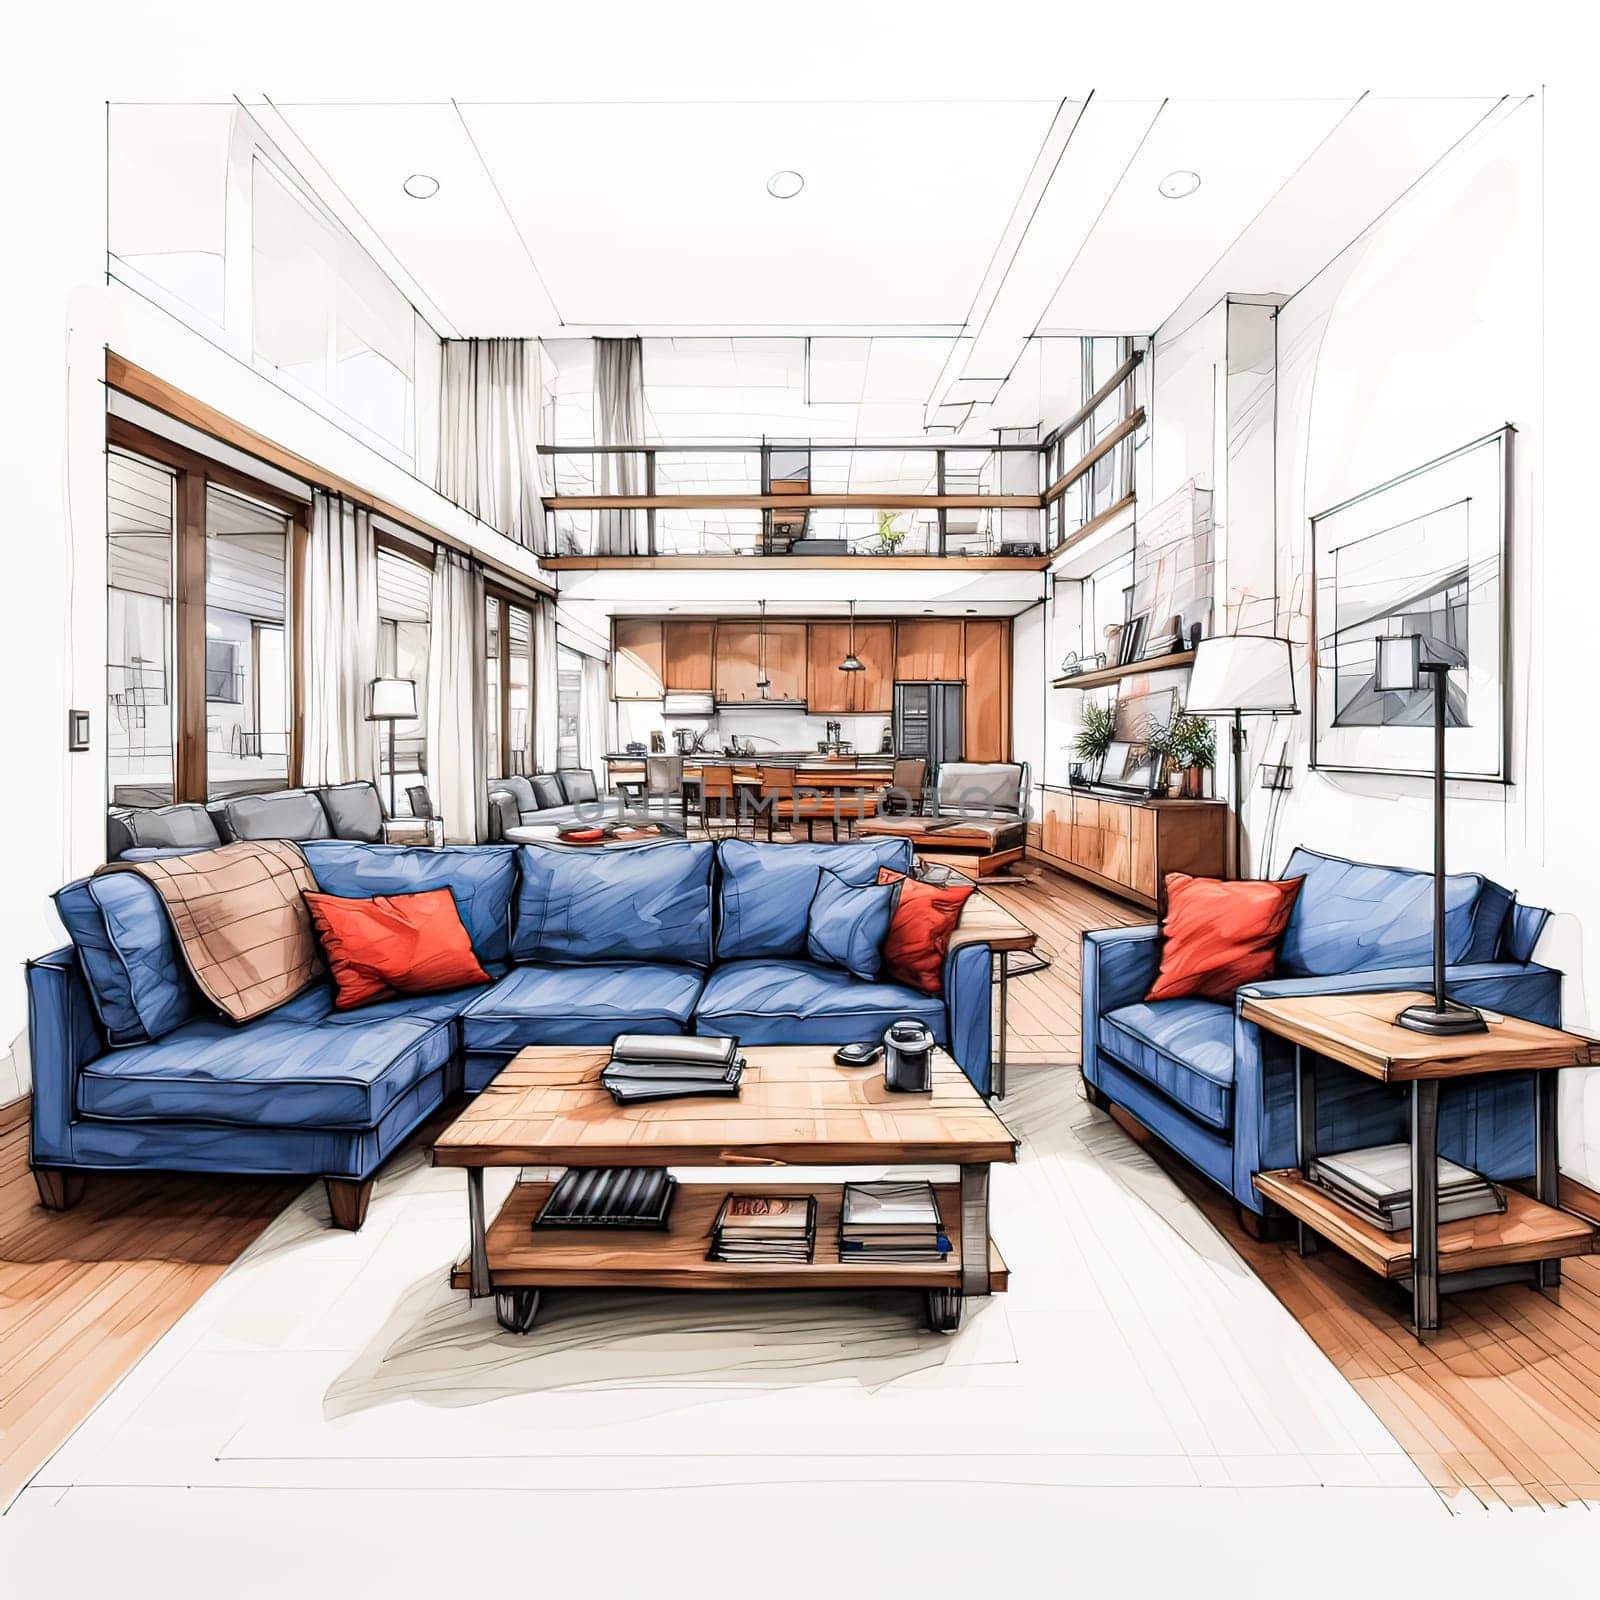 Watercolor sketch captures an American modern style living room's interior design by Alla_Morozova93